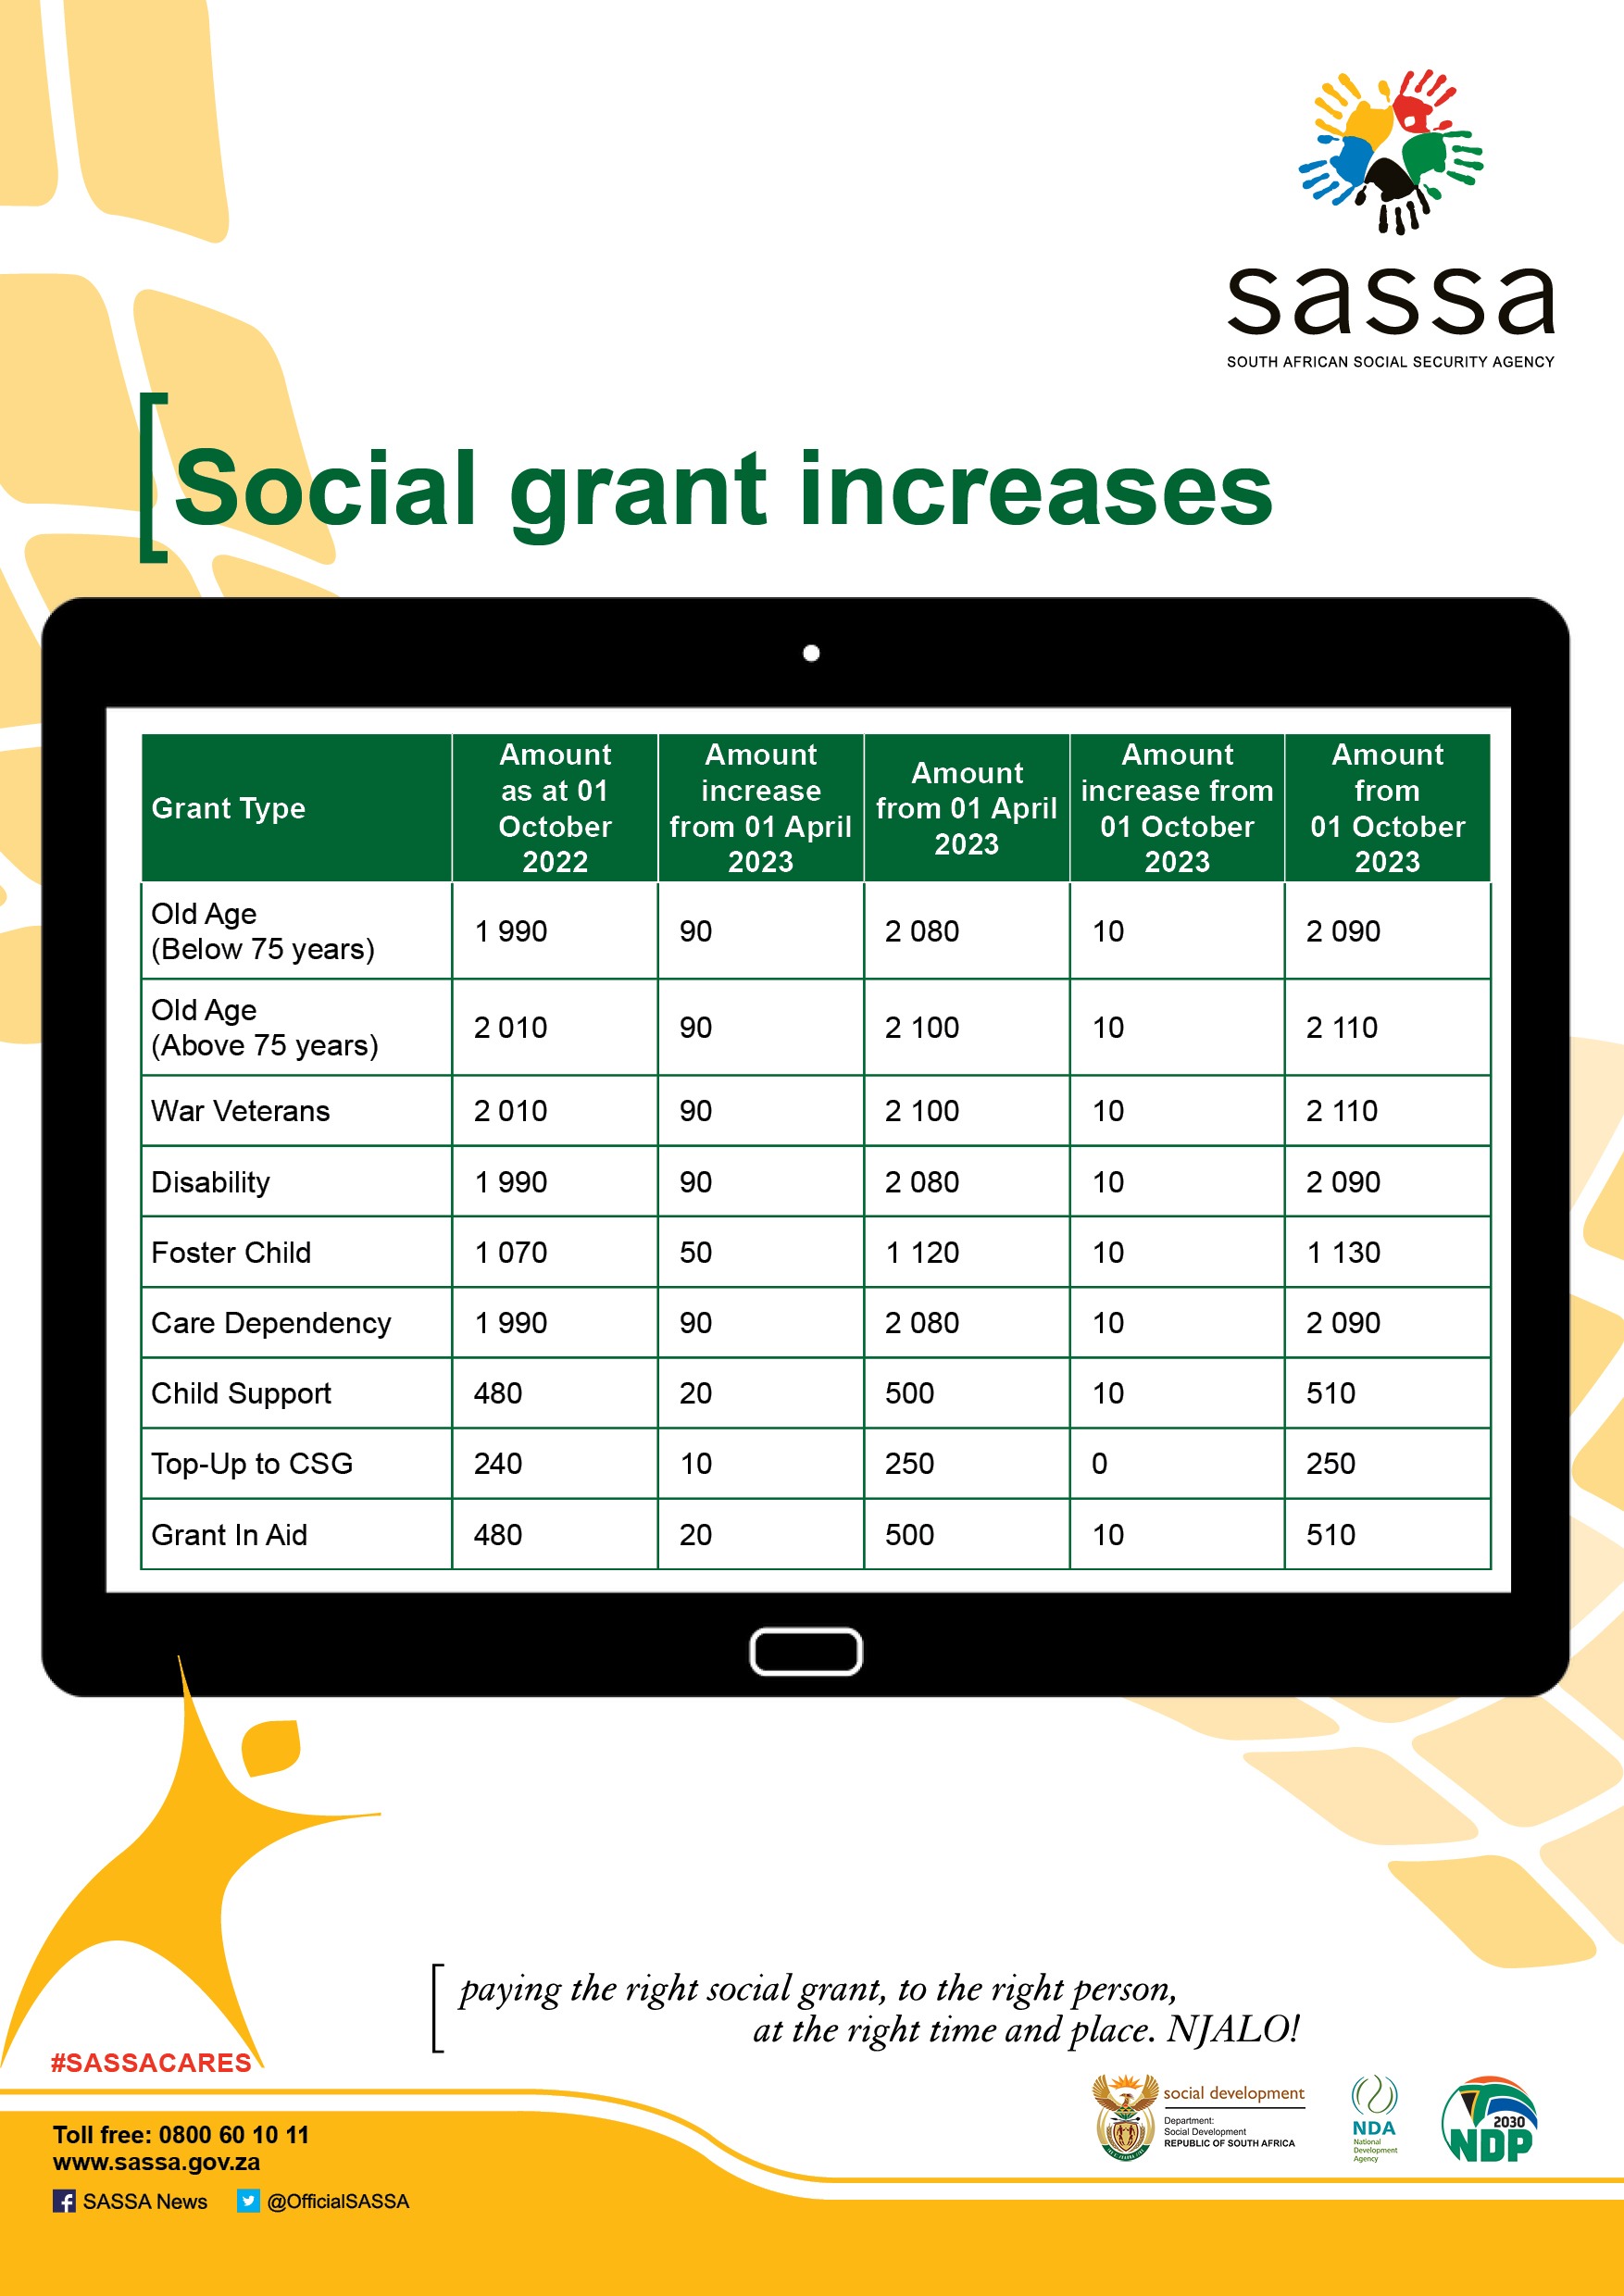 Sassa Grant Increases For 2023 All Grant Types 1 